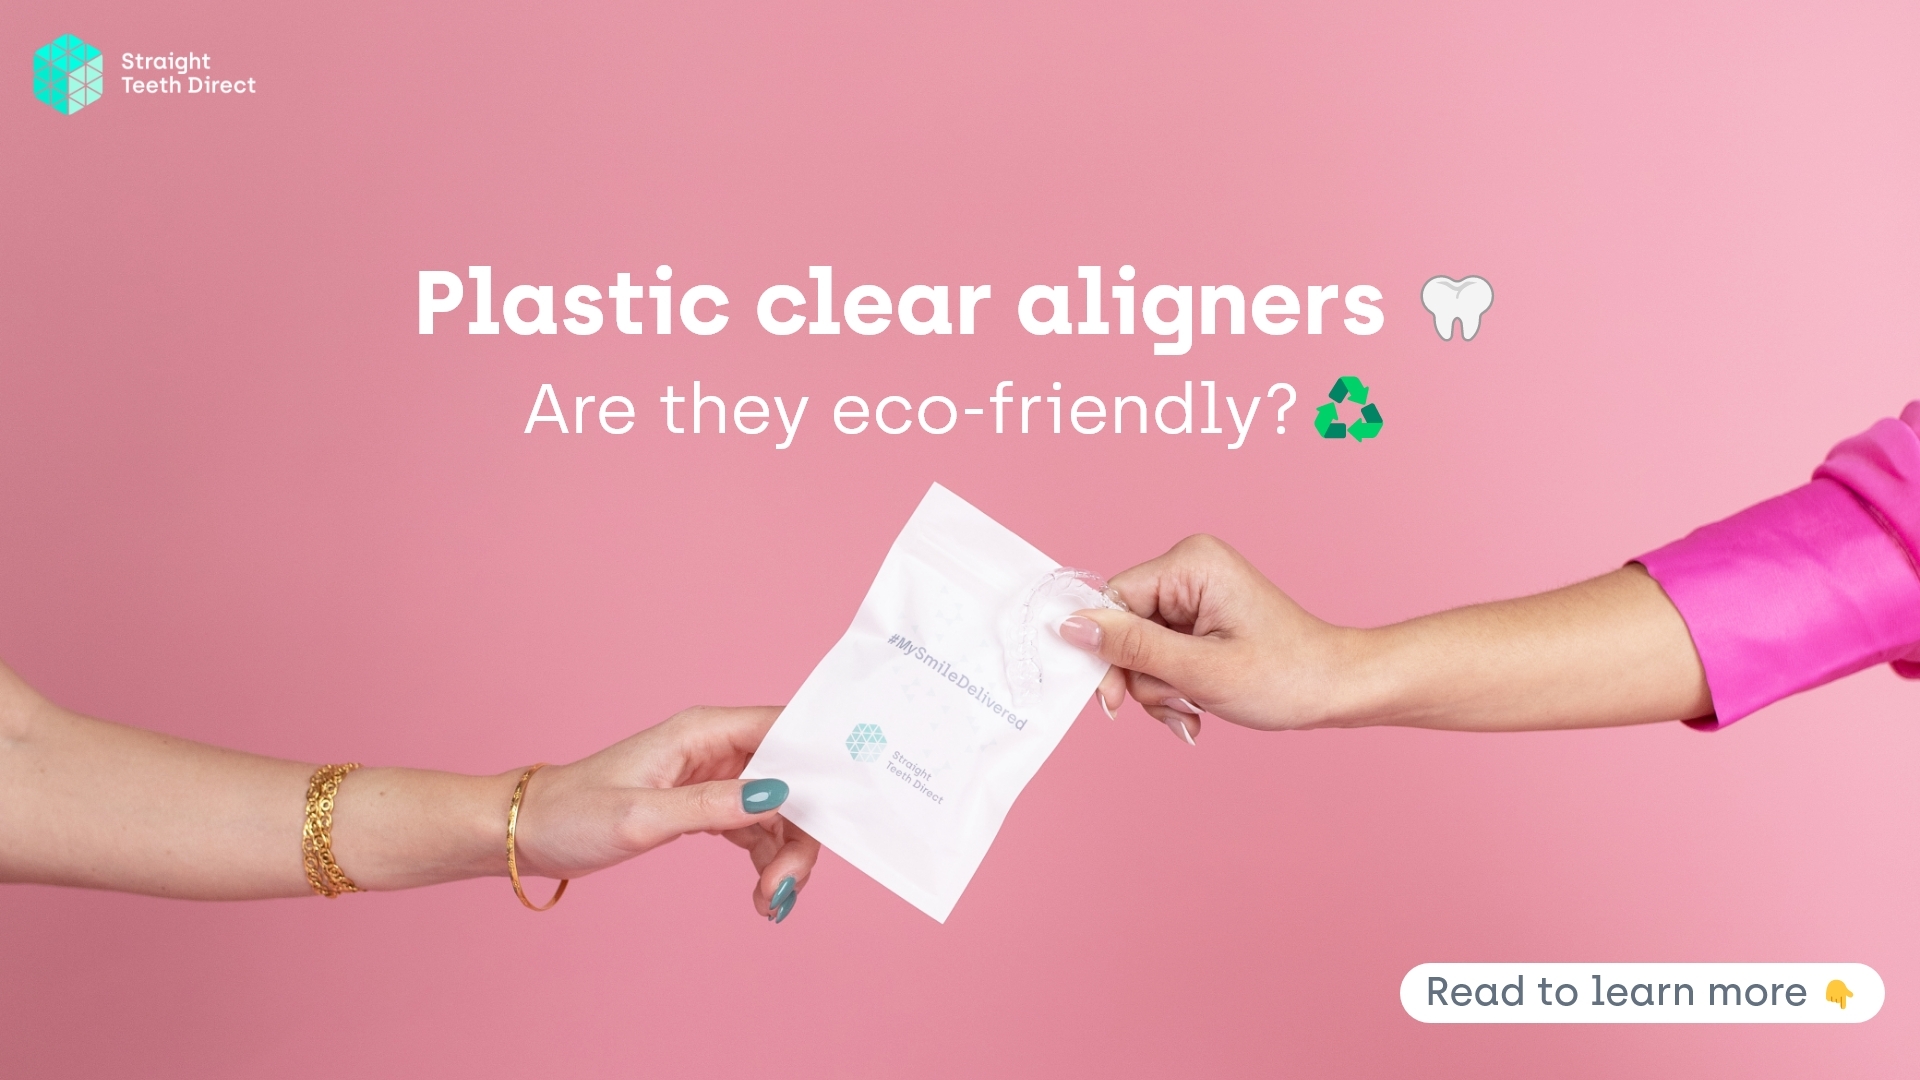 Plastic clear aligners, are they eco-friendly